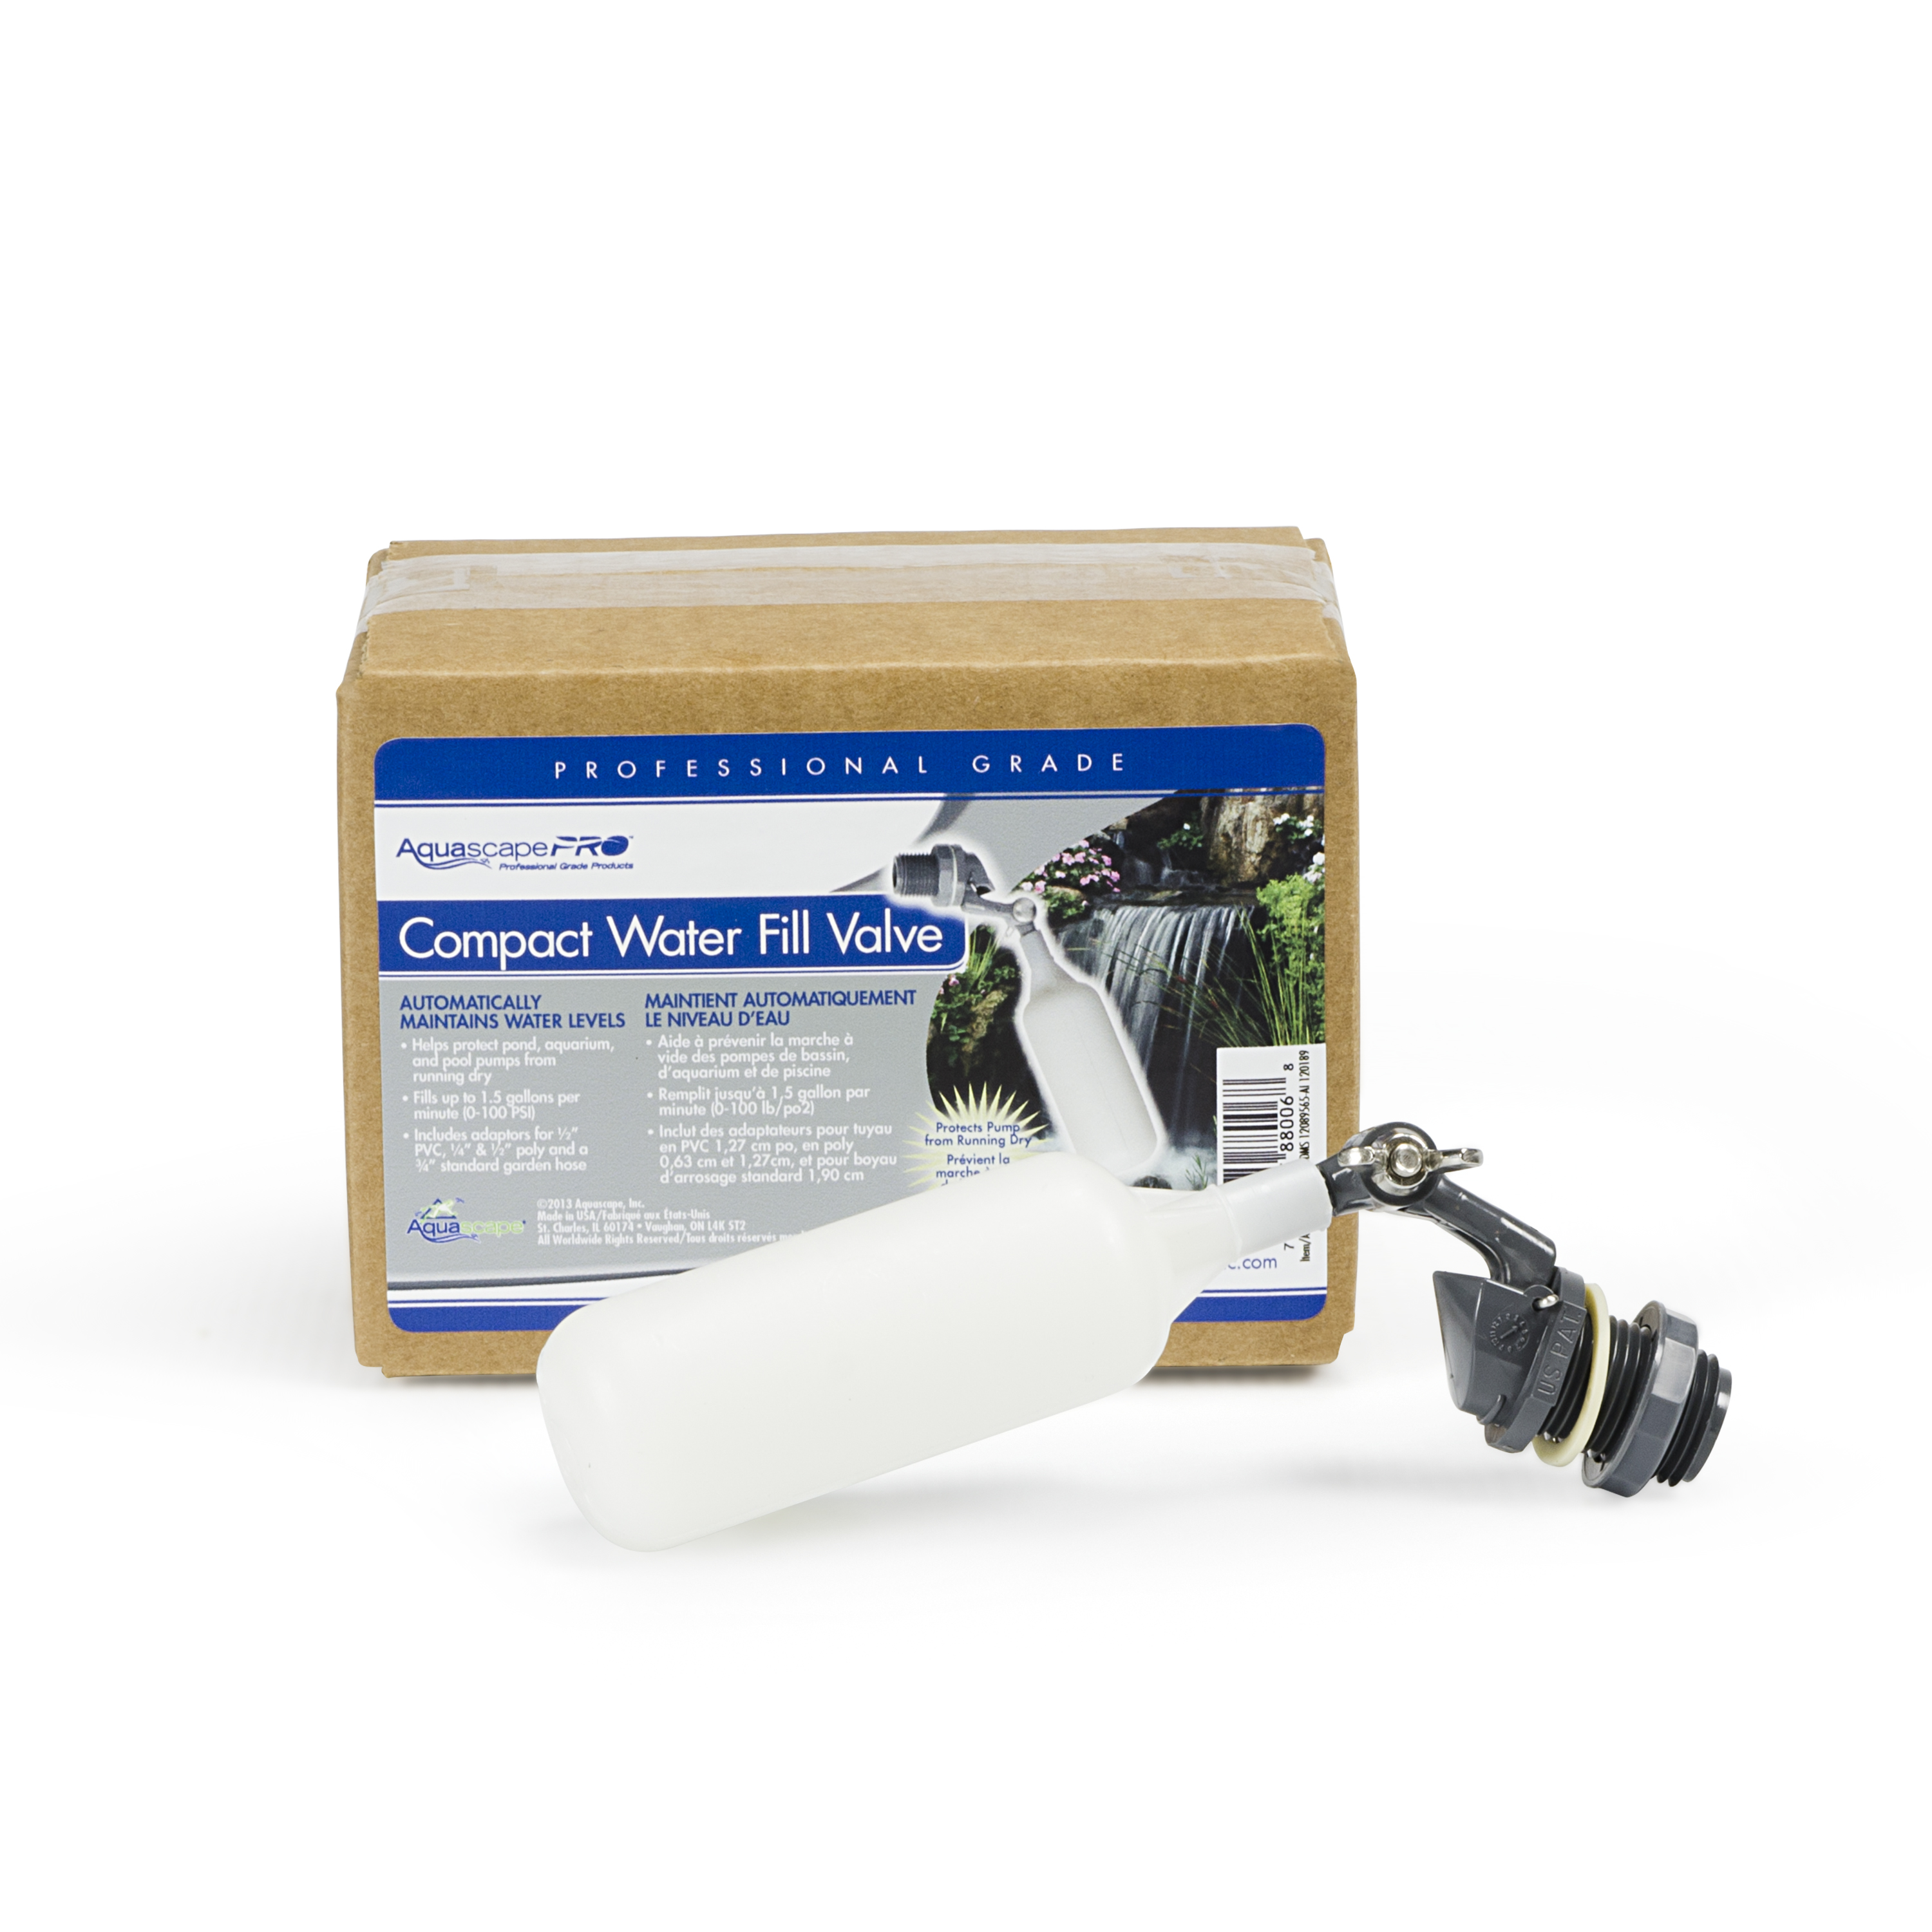 Aquascape Compact Water Fill Valve for pond water level consistency -  Aquascapes